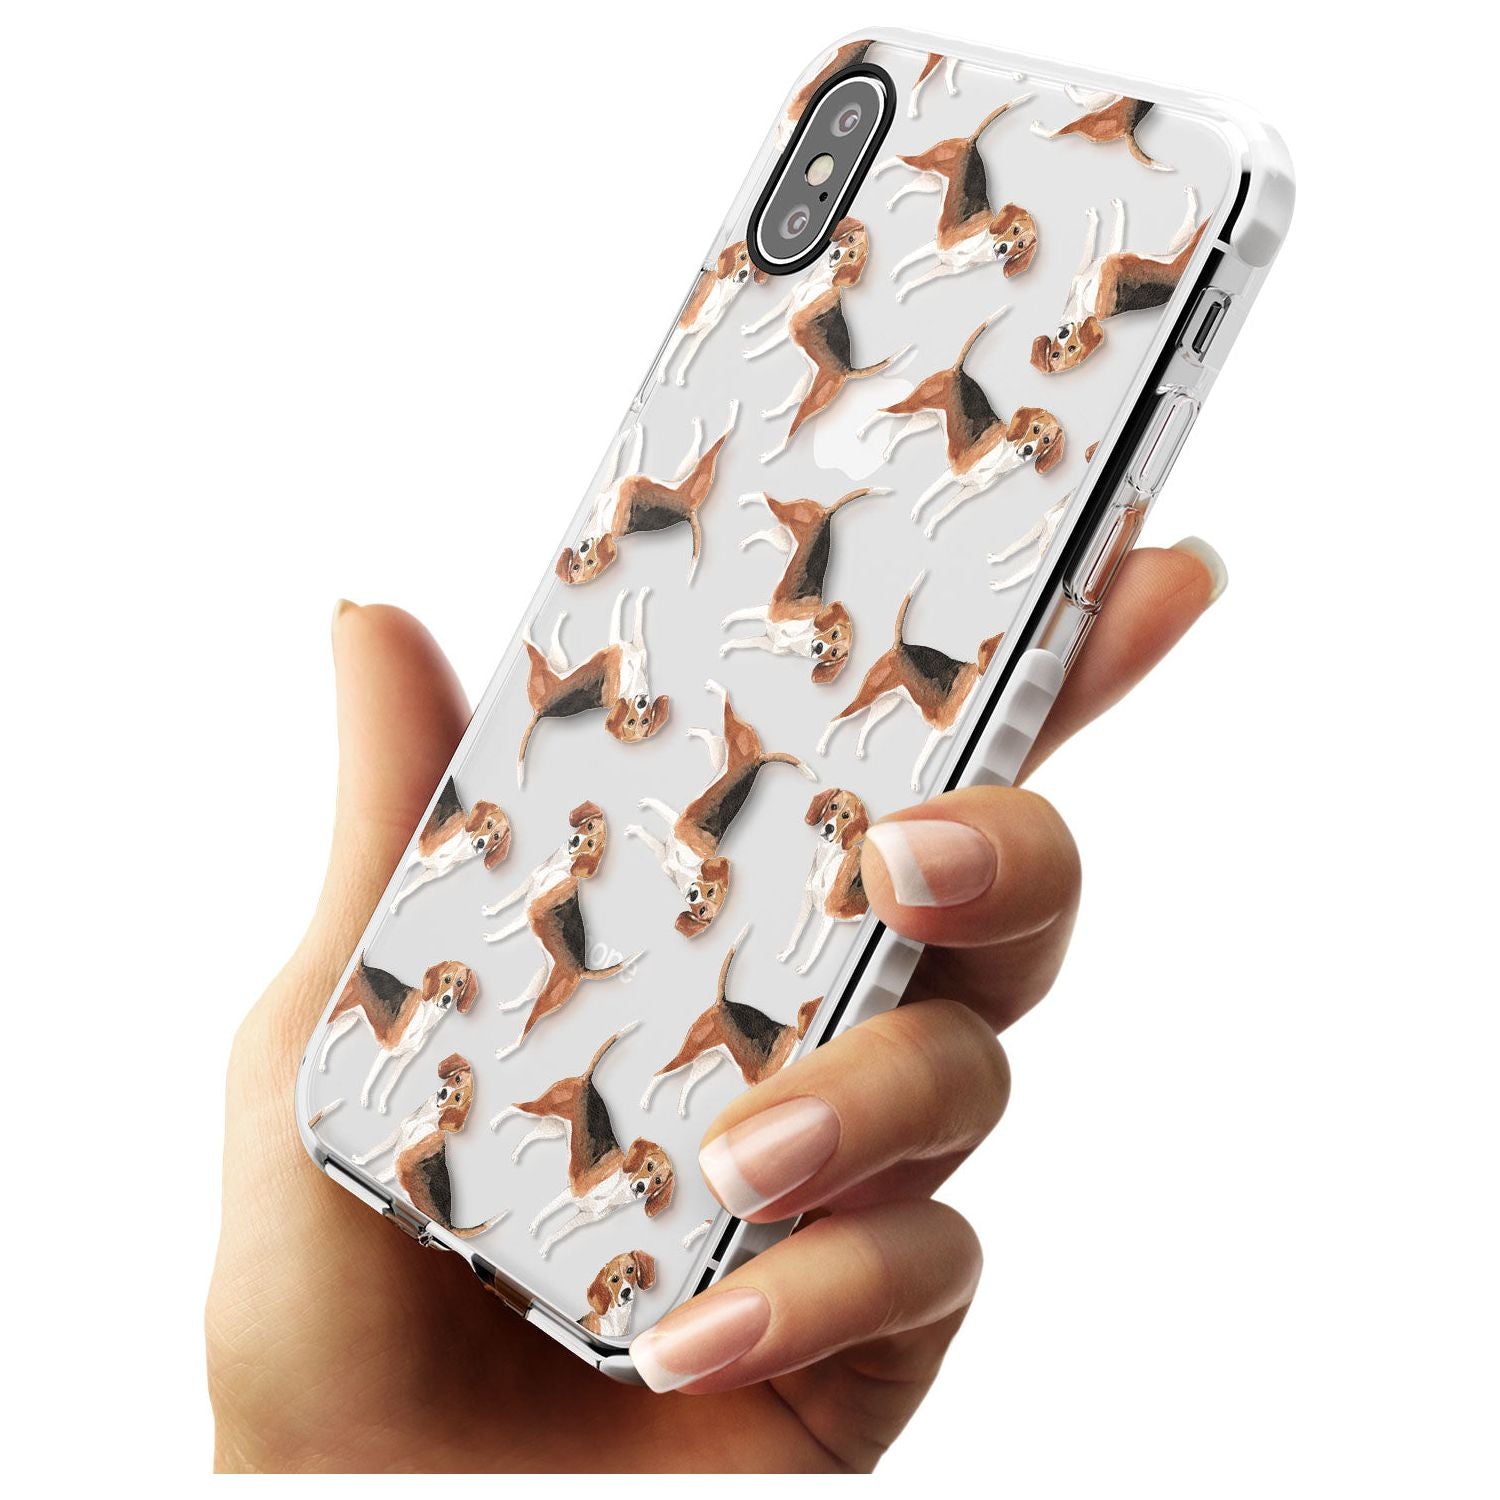 Beagle Watercolour Dog Pattern Impact Phone Case for iPhone X XS Max XR